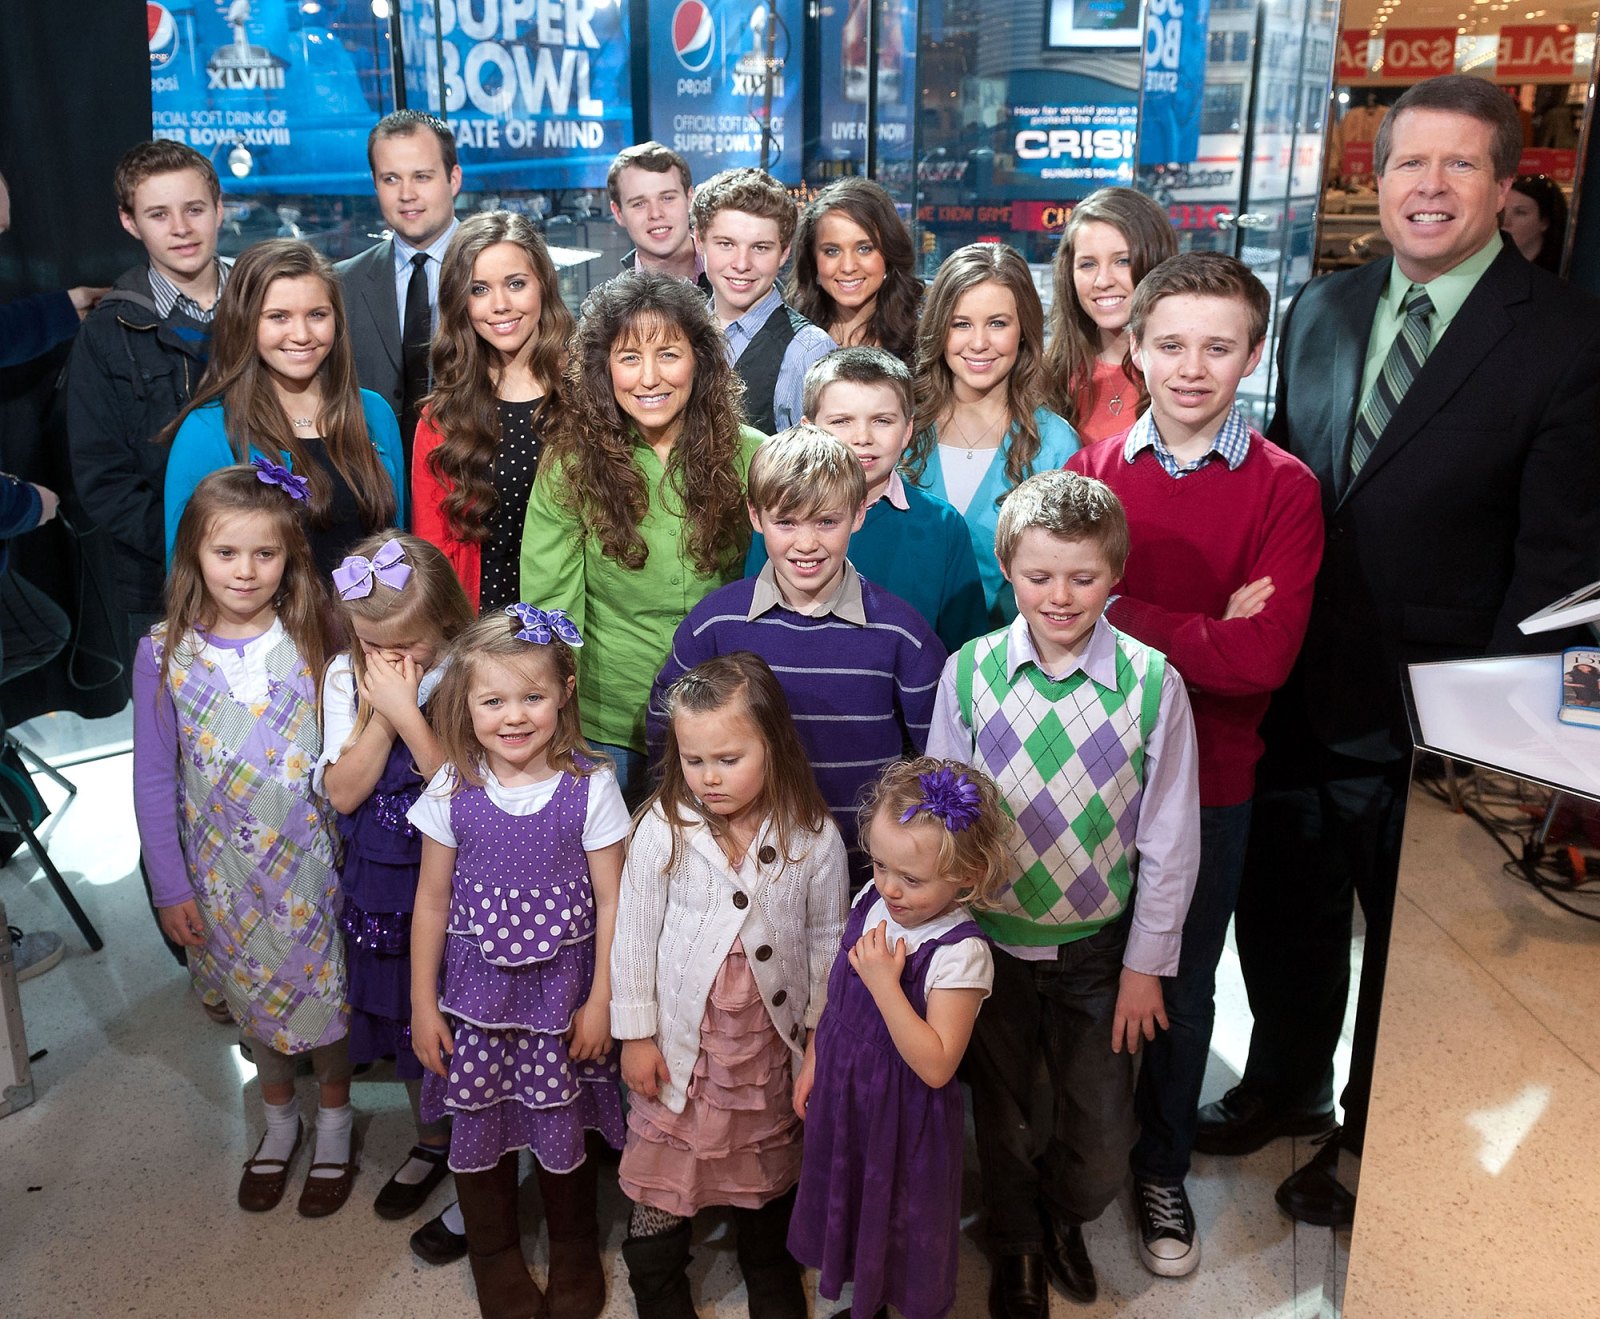 The Duggars A Comprehensive Guide of the Famous Family